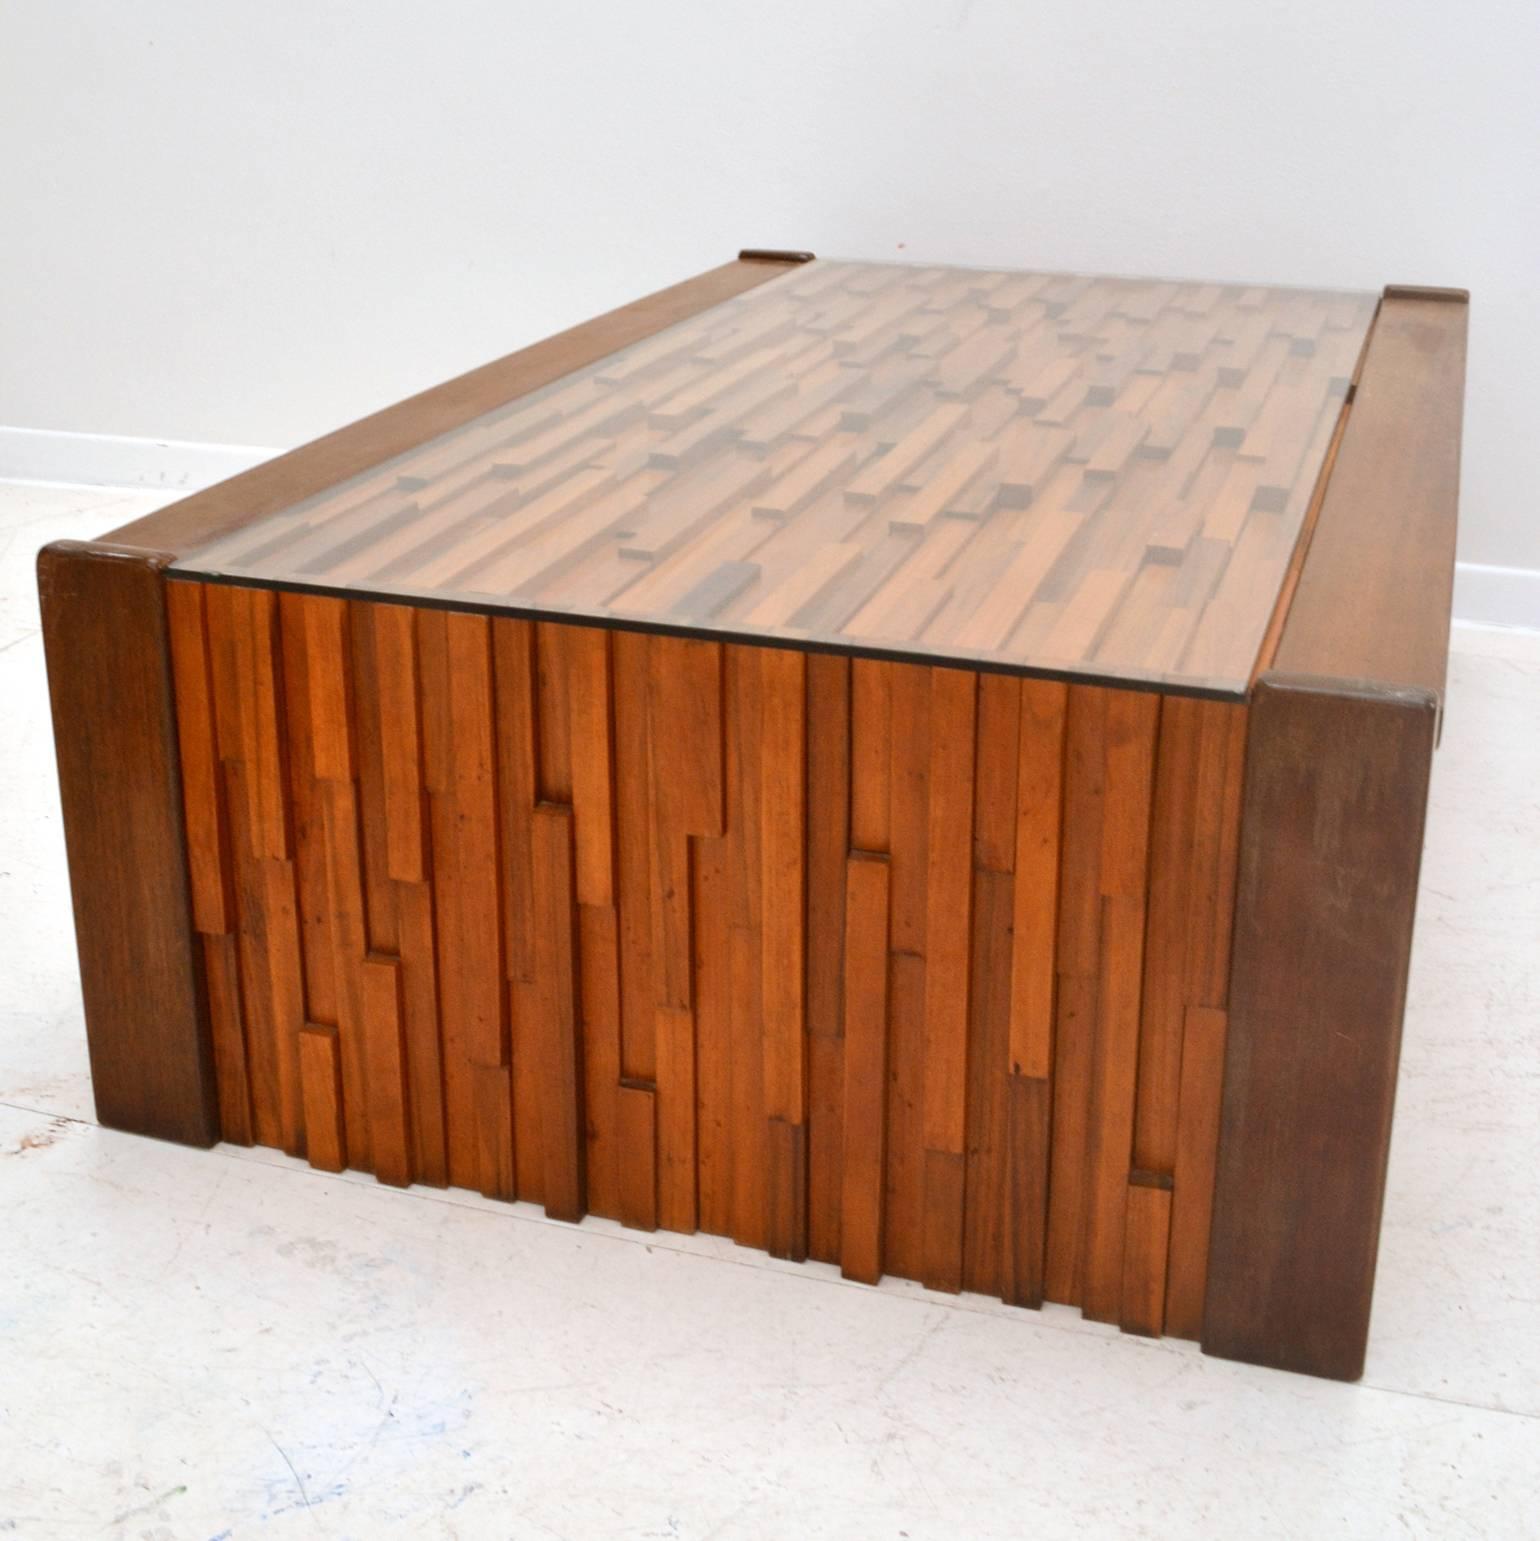 Brazilian coffee table designed as a sculptural relief of various tropical hardwoods in different heights and lengths to create a Brutalist effect edged with Mahogany and fitted glass top. The table is made in Brazil by Percival Lafer. Table and